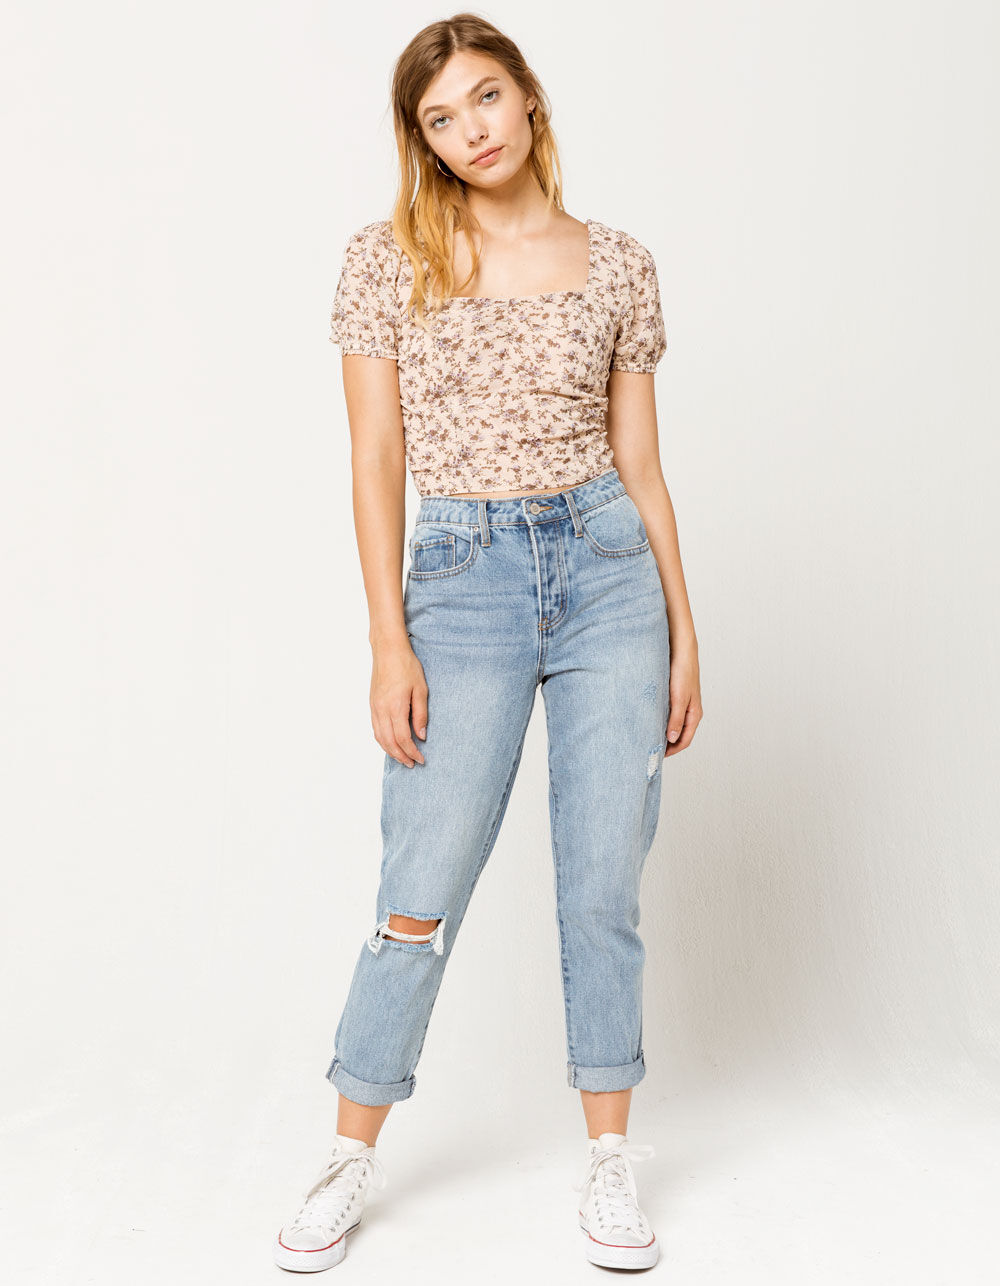 IVY & MAIN Cinch Front Peasant Womens Top - CREAM COMBO | Tillys